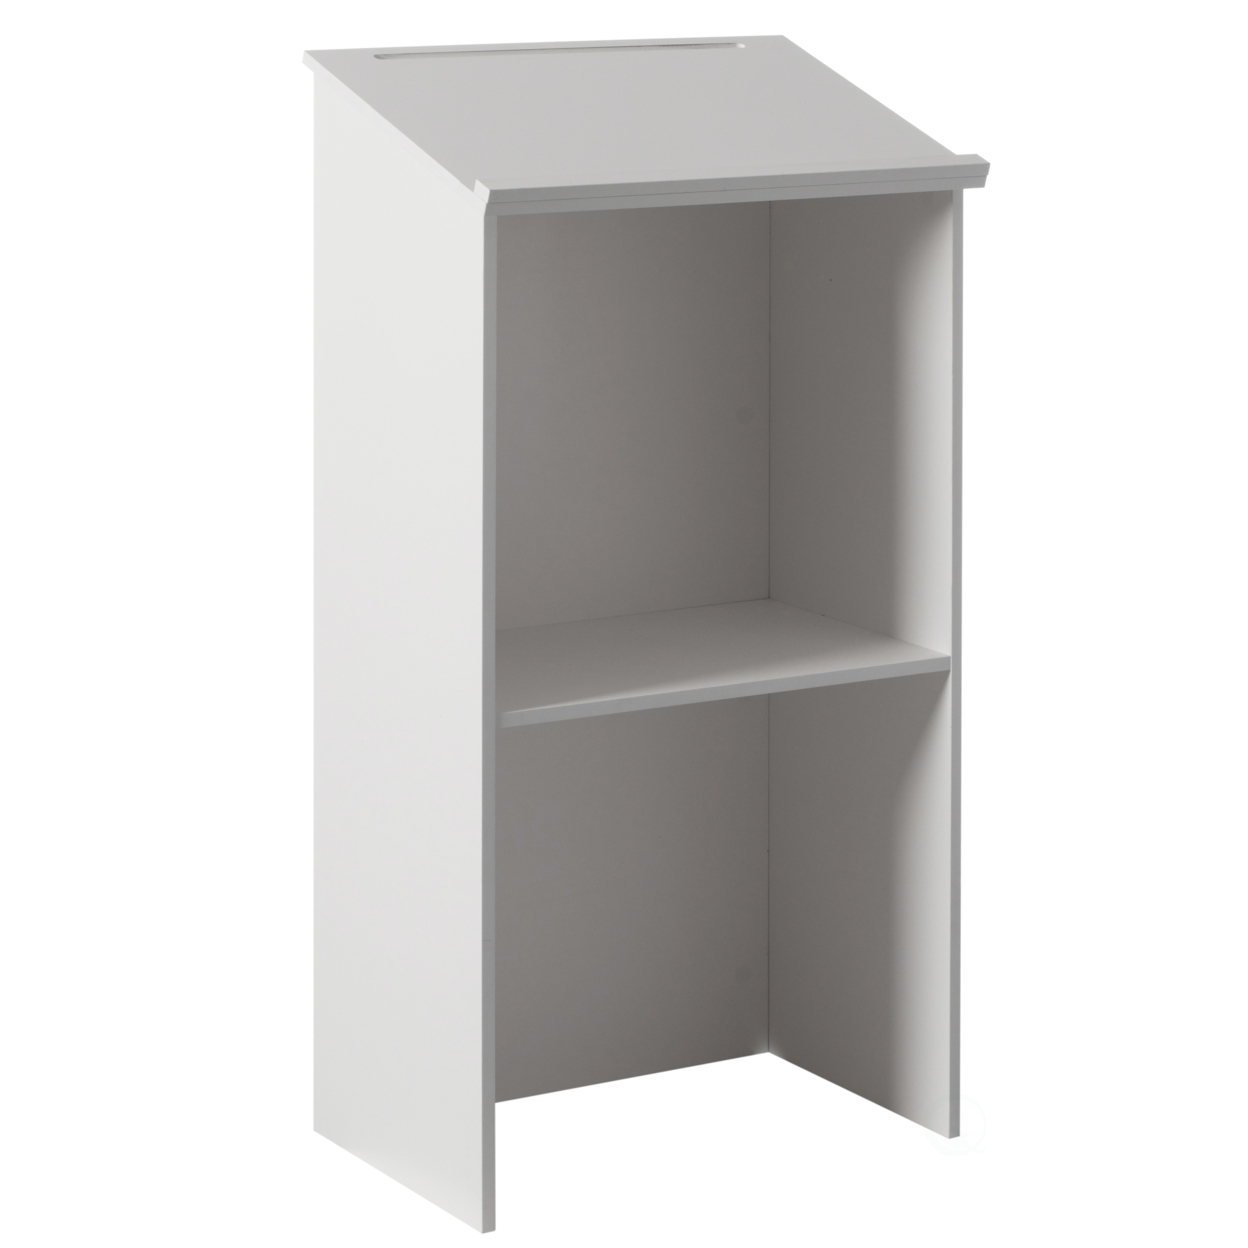 Standing Floor Podium With Storage For Church, School, Office Or Home - Cherry